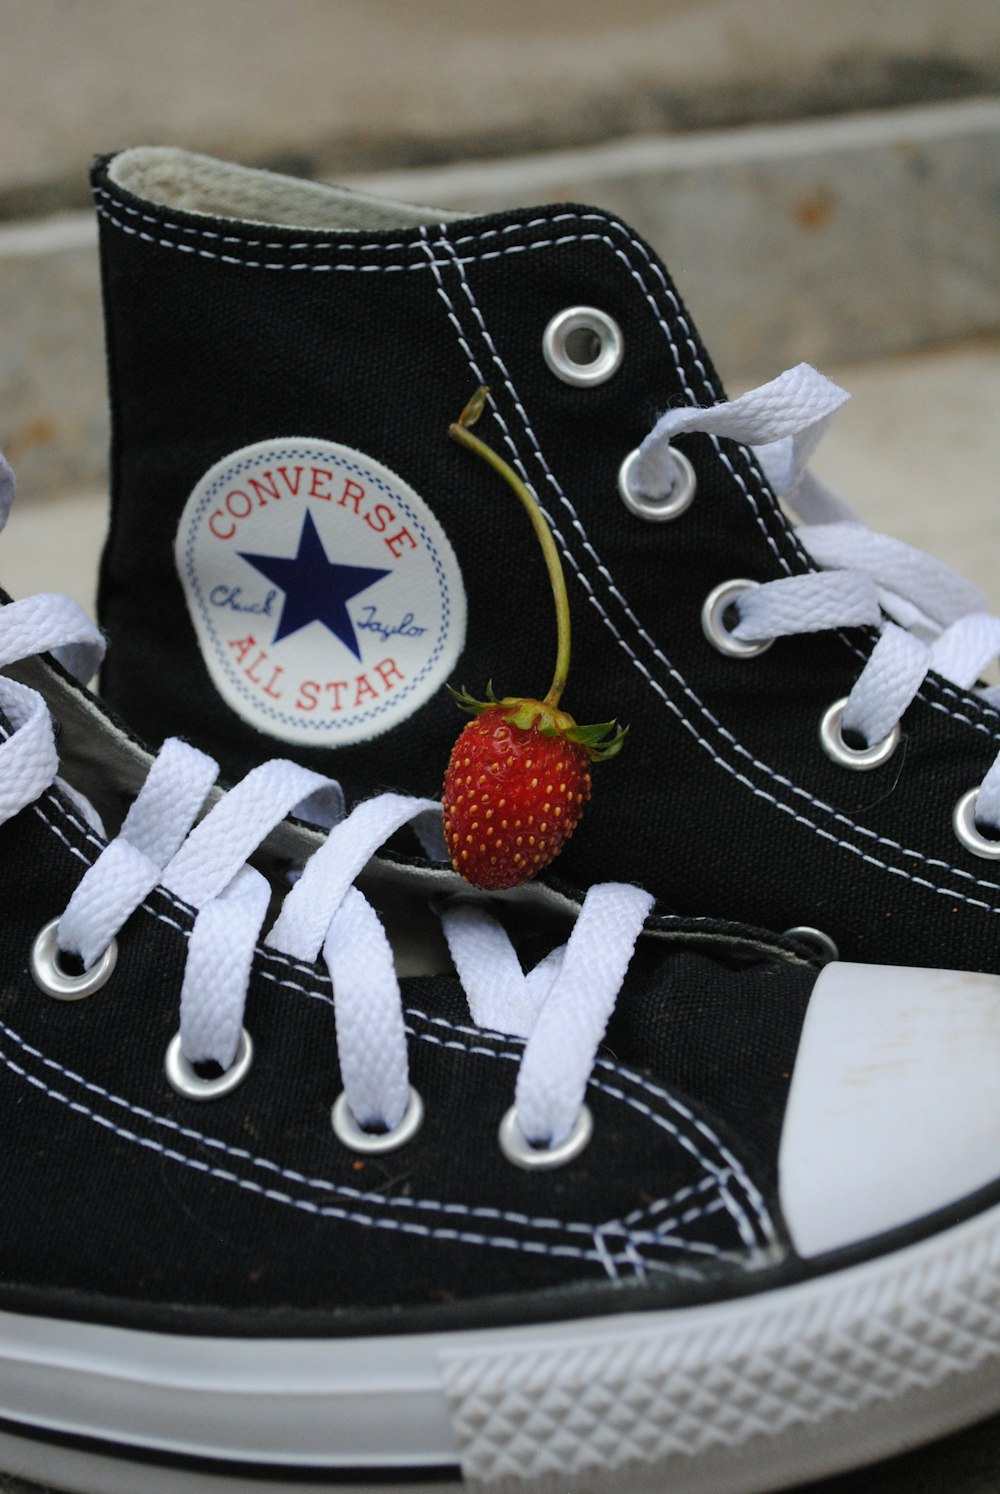 Black converse all star high top sneakers photo – Free Clothing Image on  Unsplash